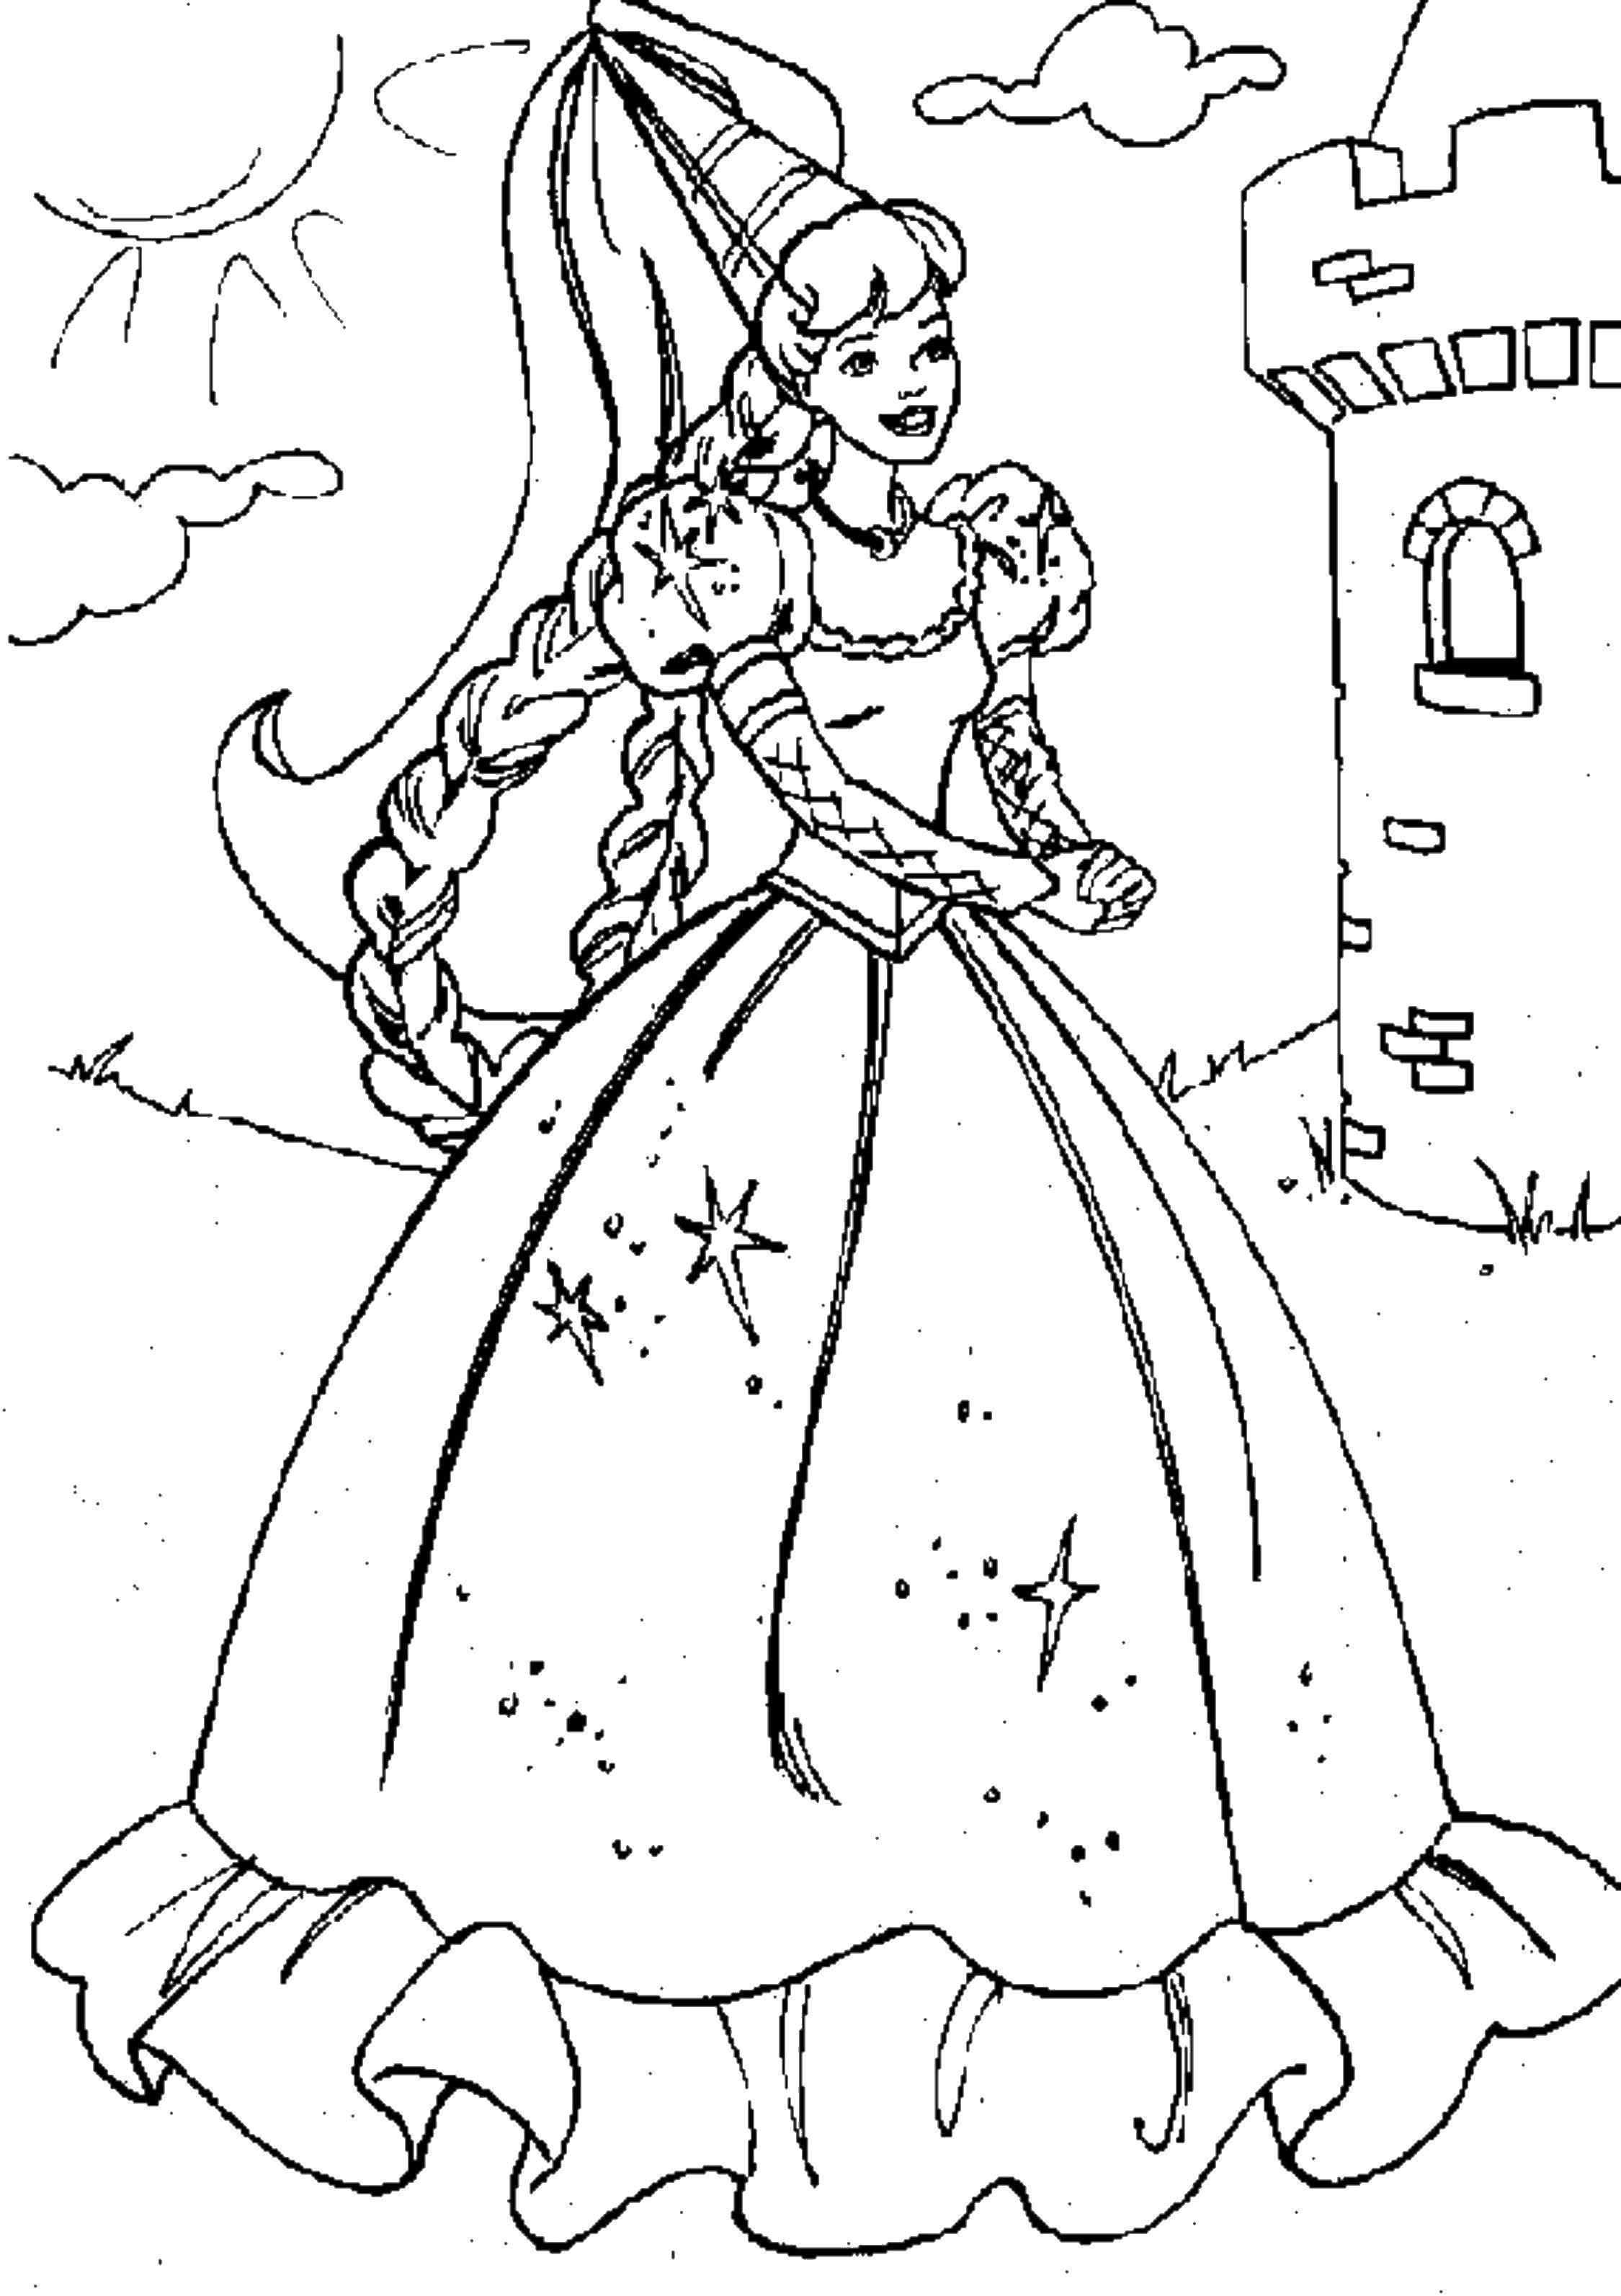 Coloring Princess near the castle. Category Princess. Tags:  Princess, castle, Princess.